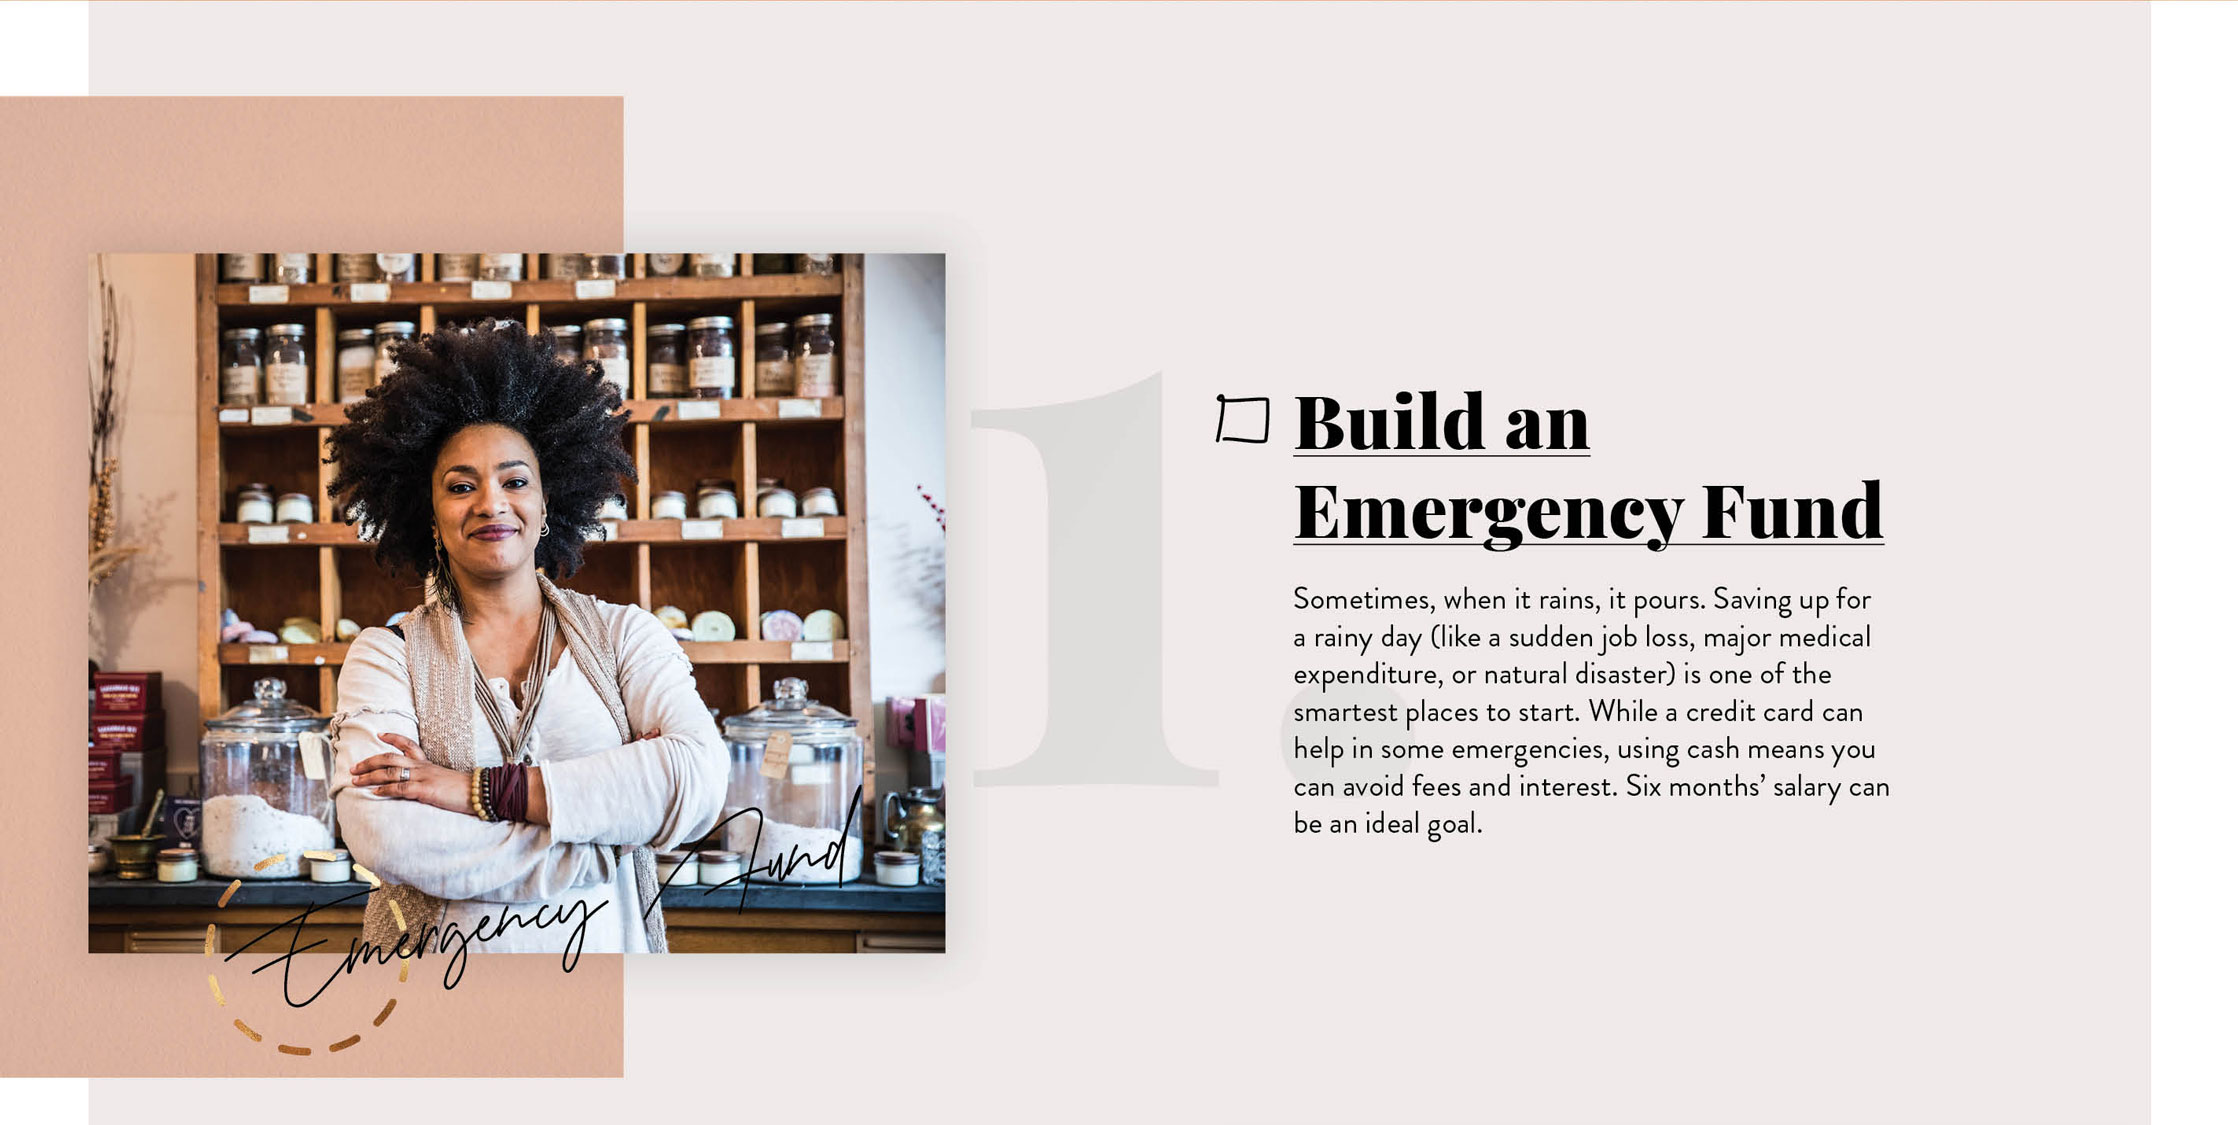 Build an Emergency Fund. Sometimes, when it rains, it pours. Saving up for a rainy day (like a sudden job loss, major medical expenditure, or natural disaster) is one of the smartest places to start. While a credit card can help in some emergencies, using cash means you can avoid fees and interest. Six months’ salary can be an ideal goal.